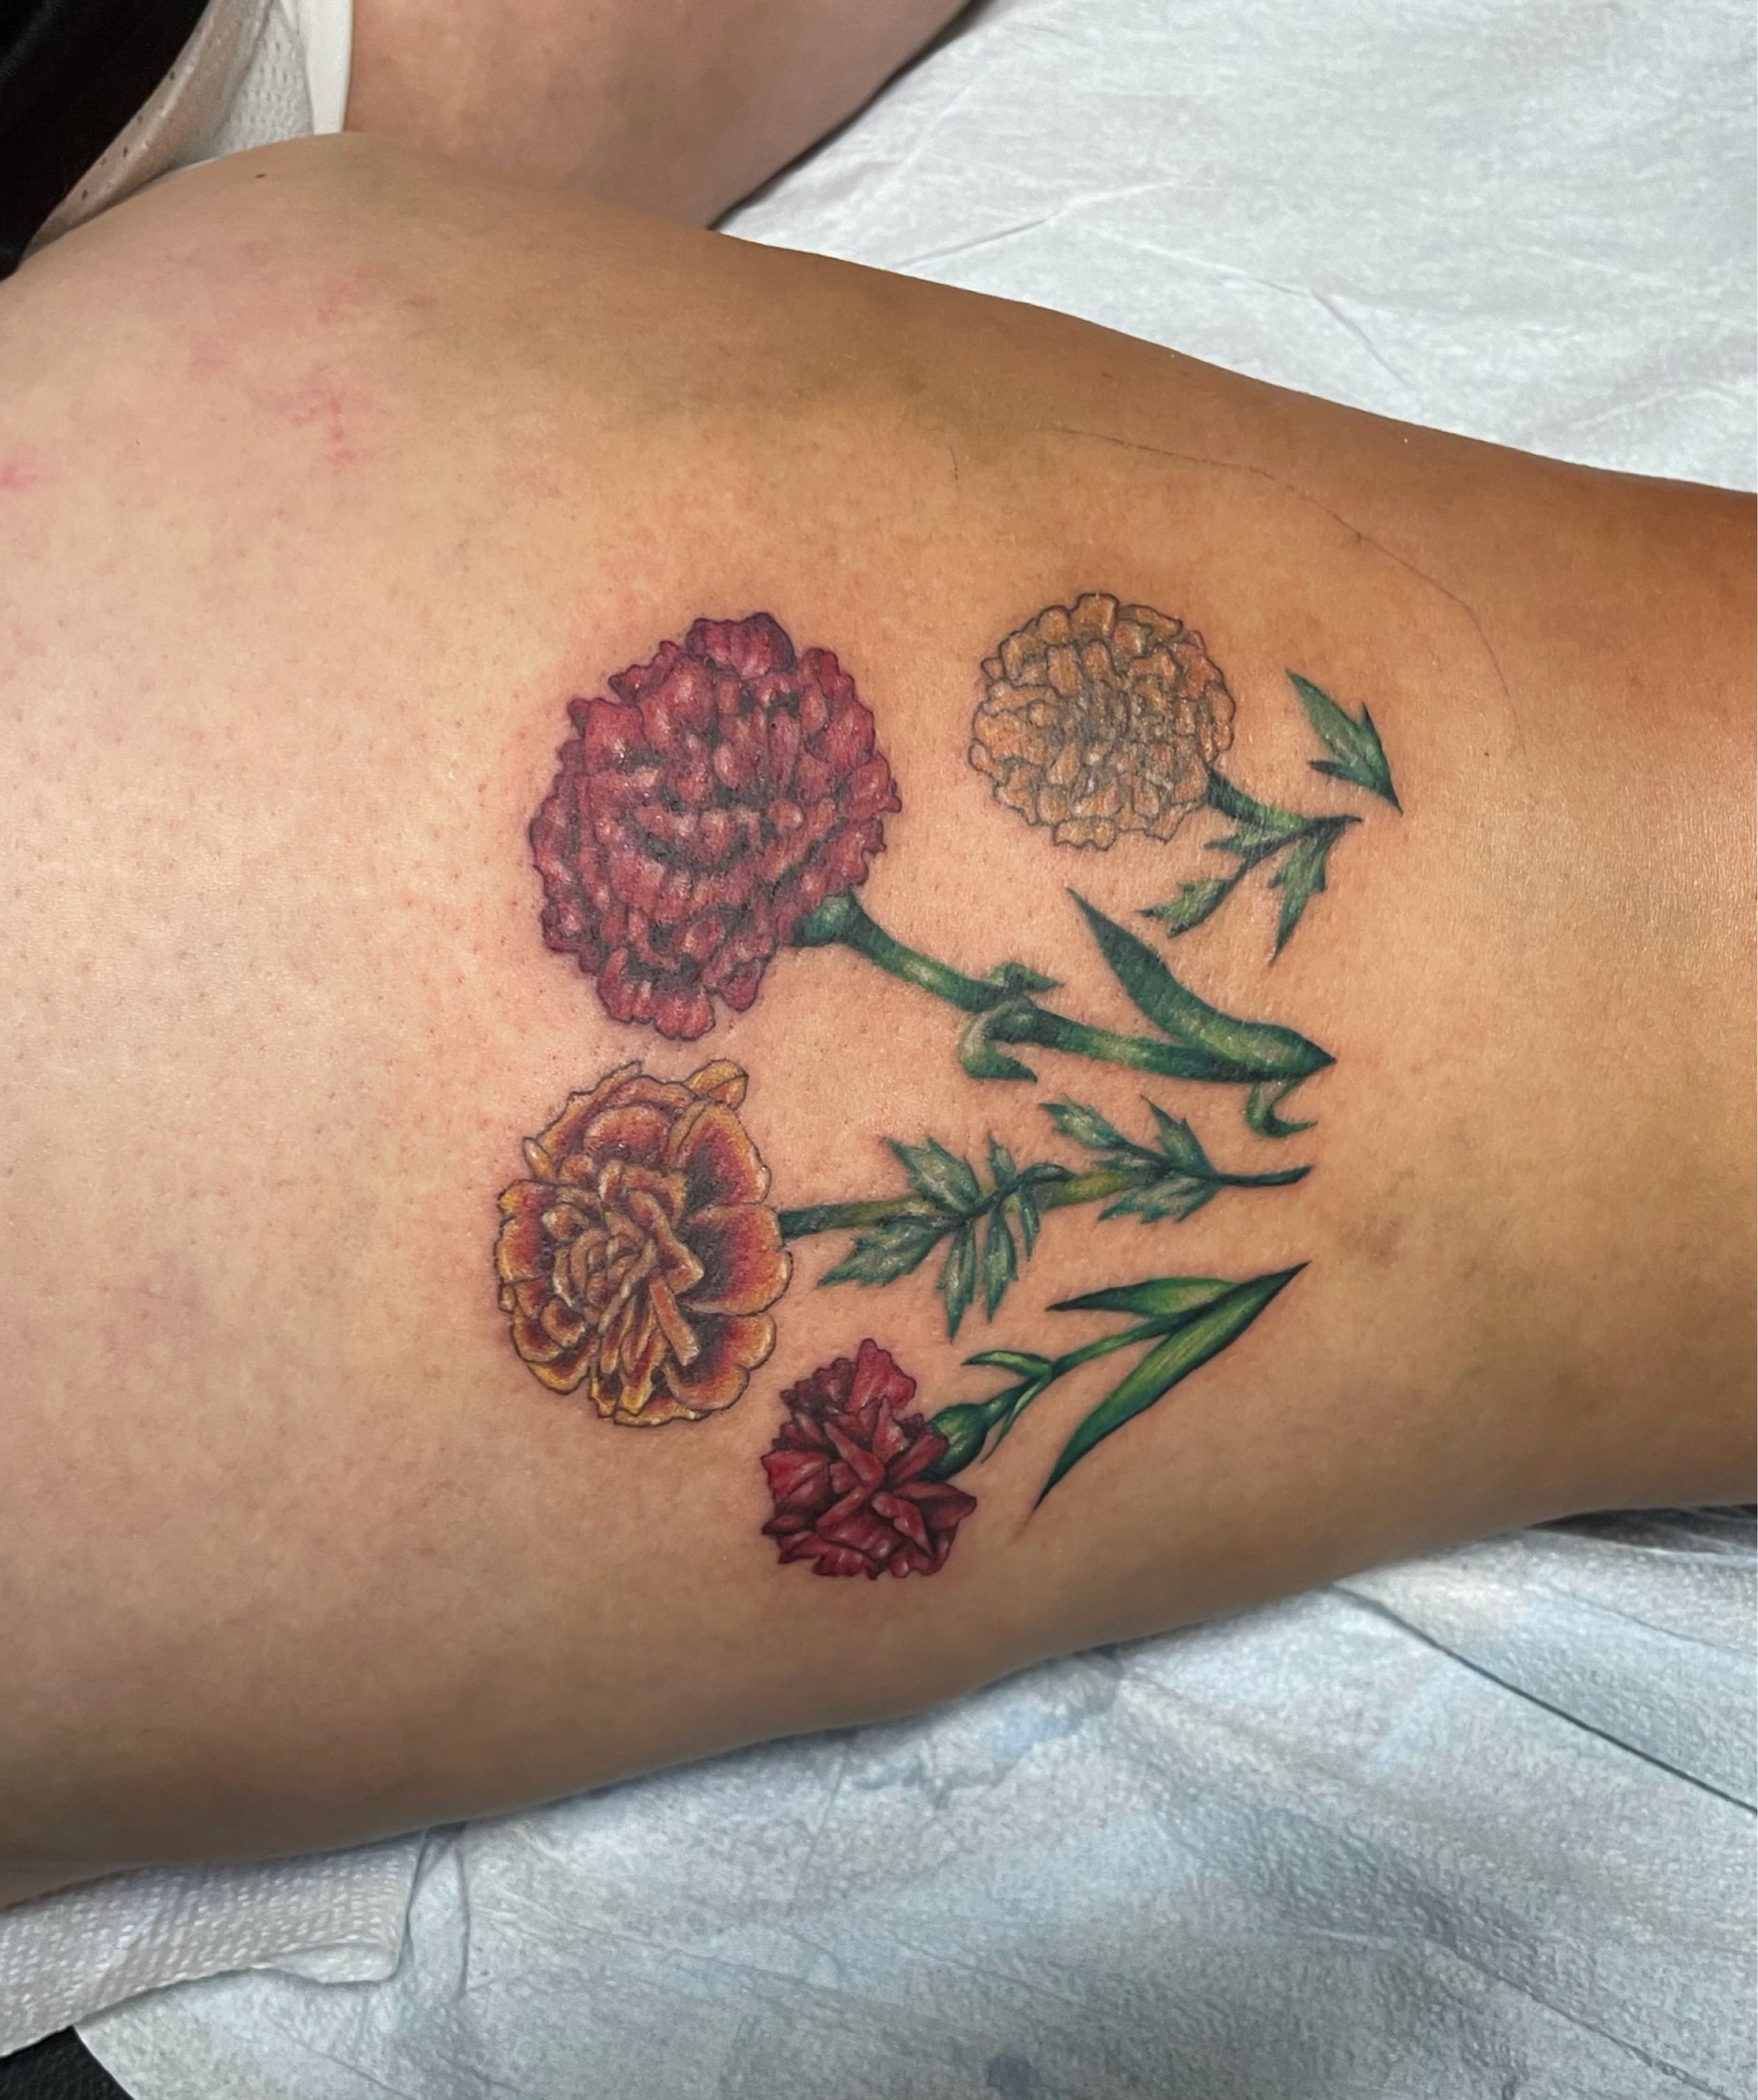 101 Amazing Marigold Tattoo Designs You Need To See  Outsons